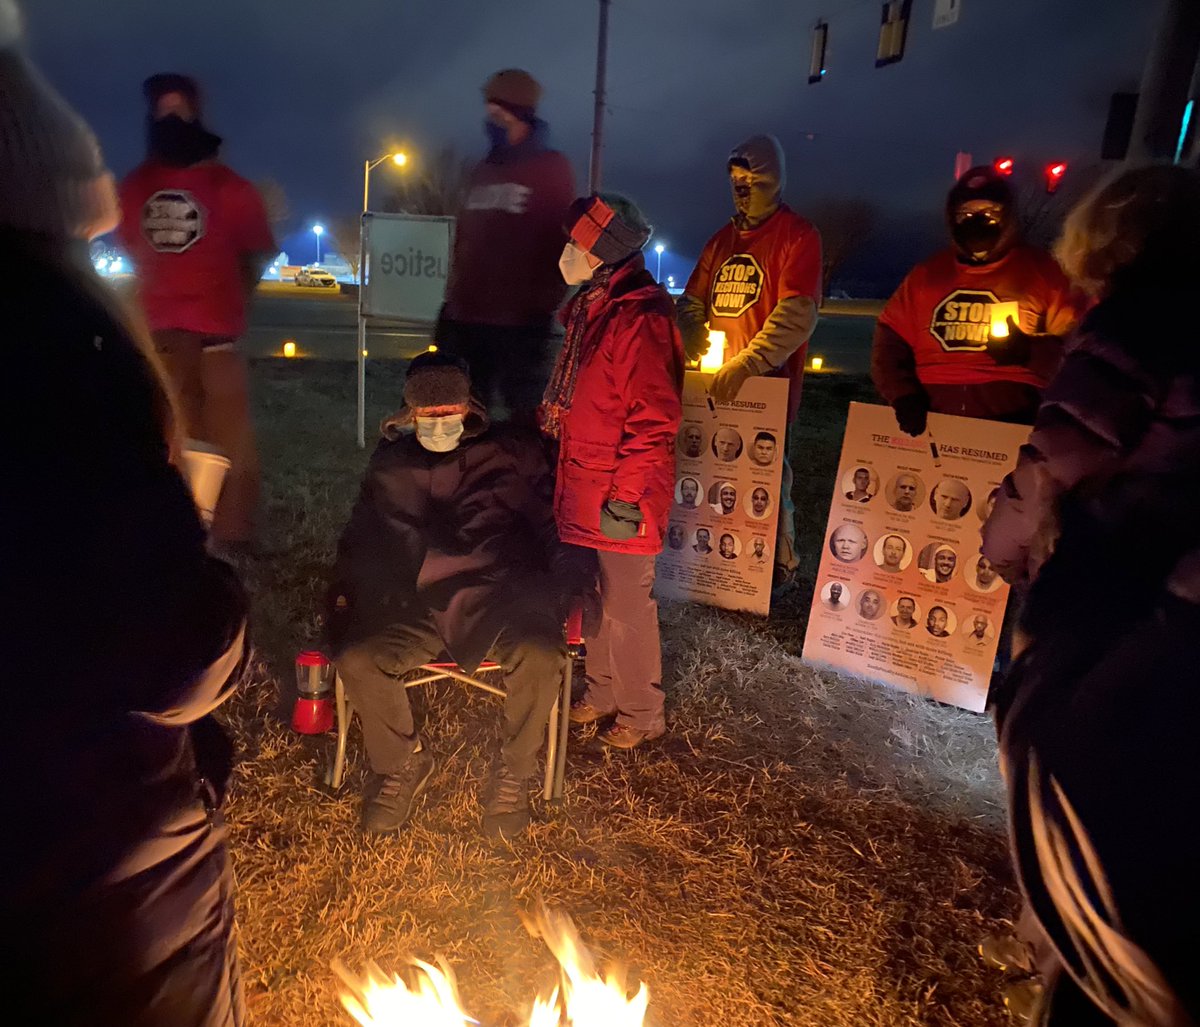 They have also built a fire. Bill Breeden is here, less than 24 hours after he accompanied Corey Johnson as his spiritual advisor. As you may have seen from my thread last night, he was traumatized by the execution, in part because they didn’t let him read Corey’s last statement.